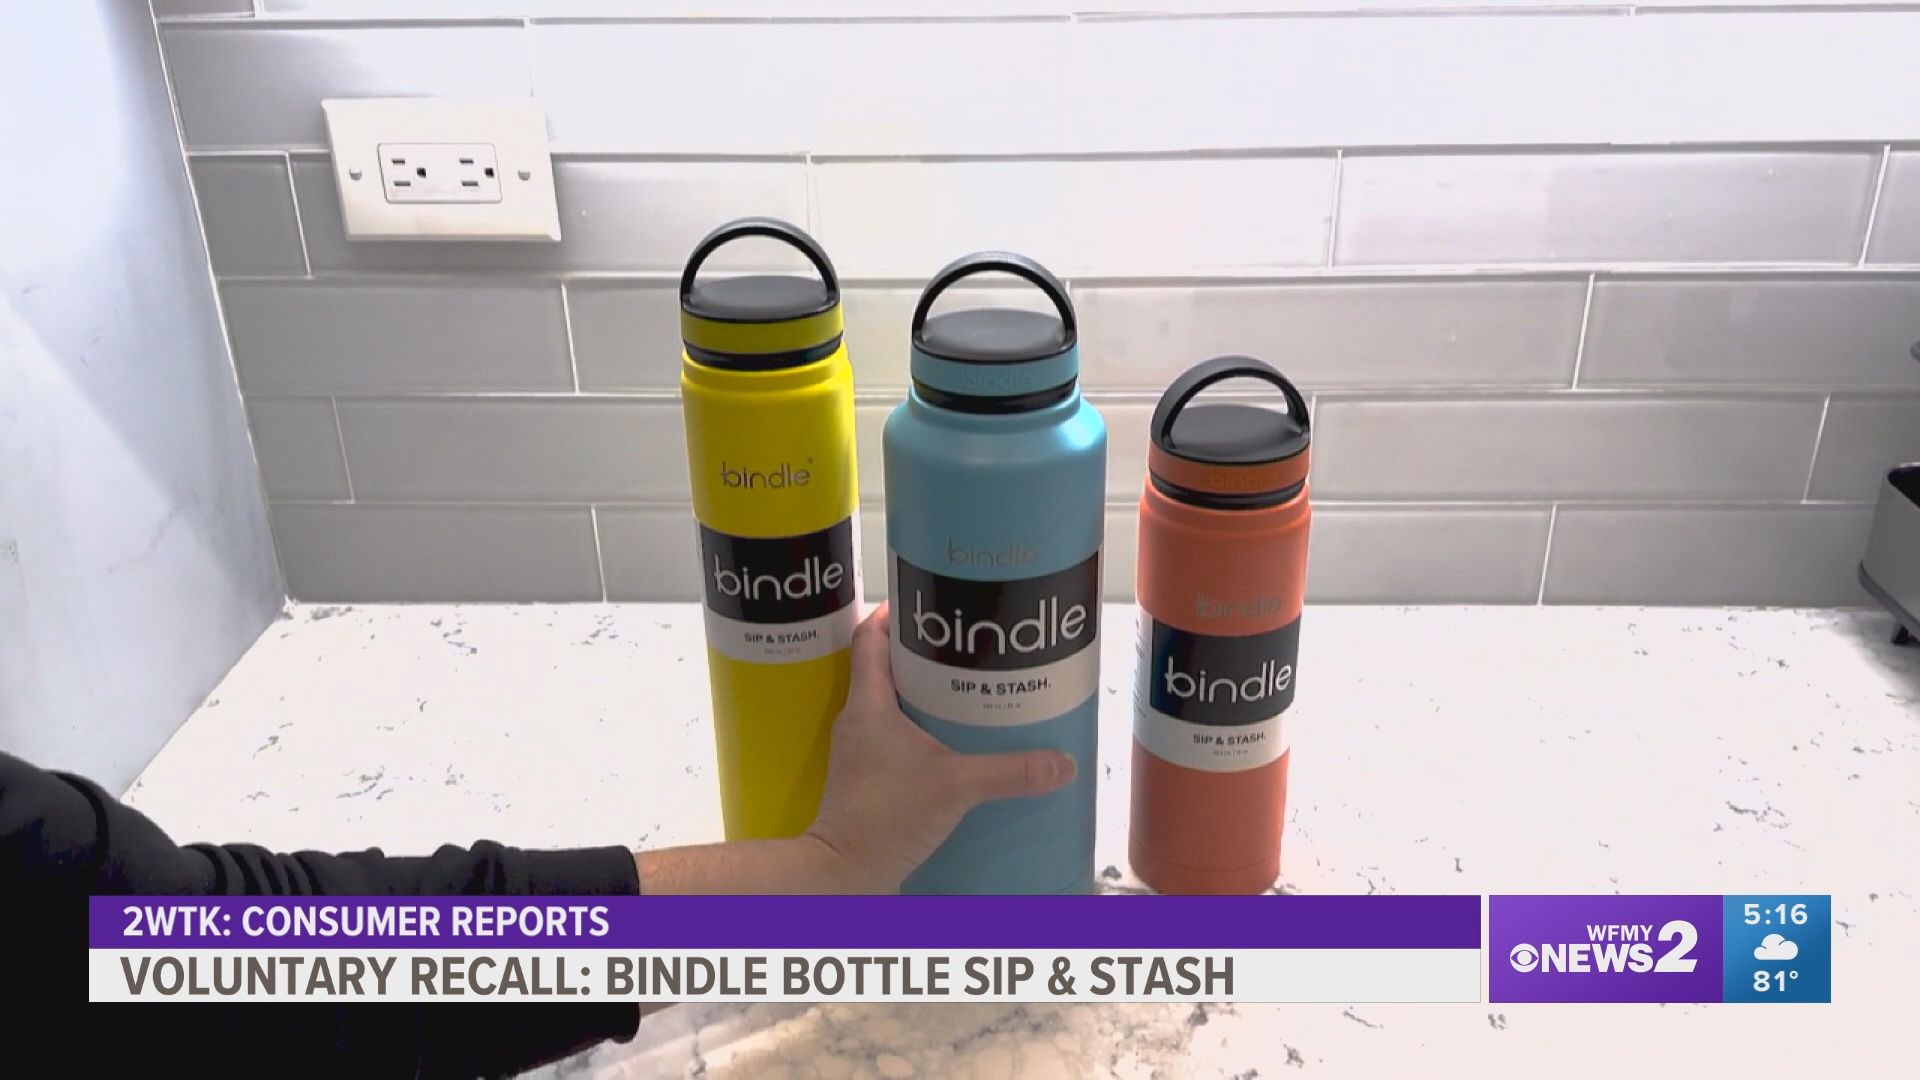 The Bindle Bottle was named one of "Oprah's Favorite Things,” but it’s been recalled due to lead contamination.